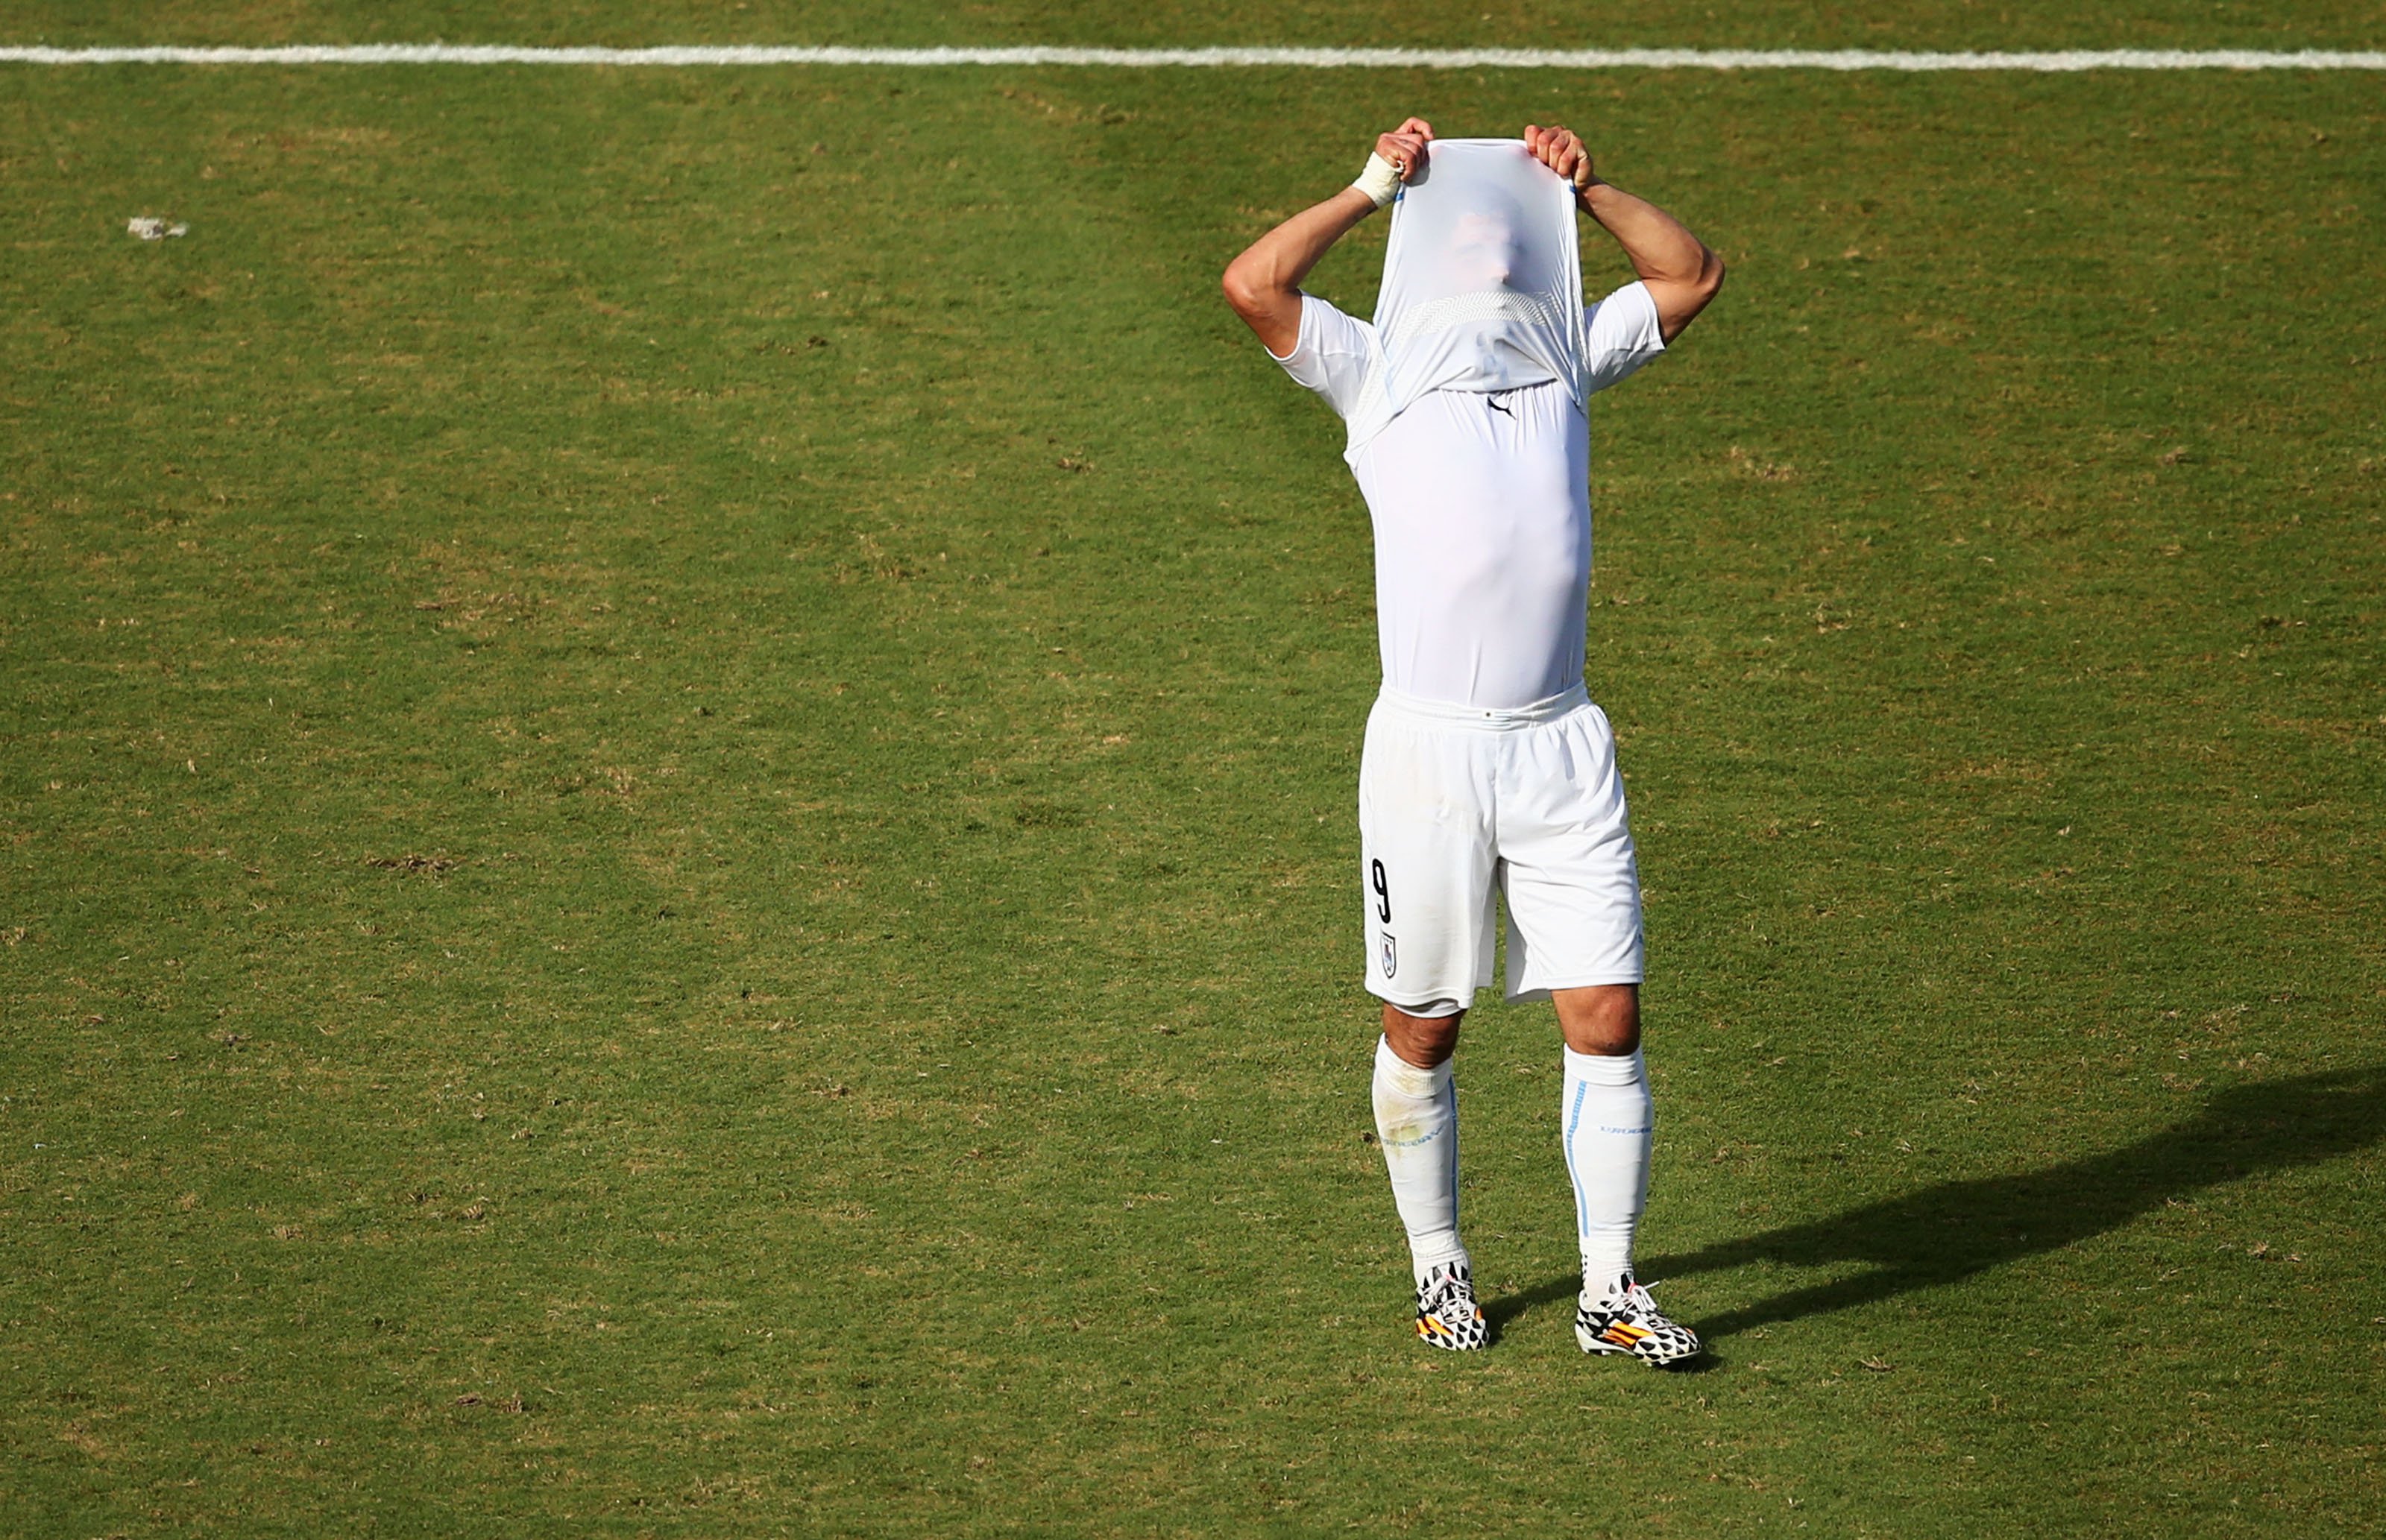 Luis Suarez of Uruguay reacts after a 1-0 victory over Italy in the 2014 FIFA World Cup Brazil Group D match between Italy and Uruguay at Estadio das Dunas on June 24, 2014 in Natal, Brazil.